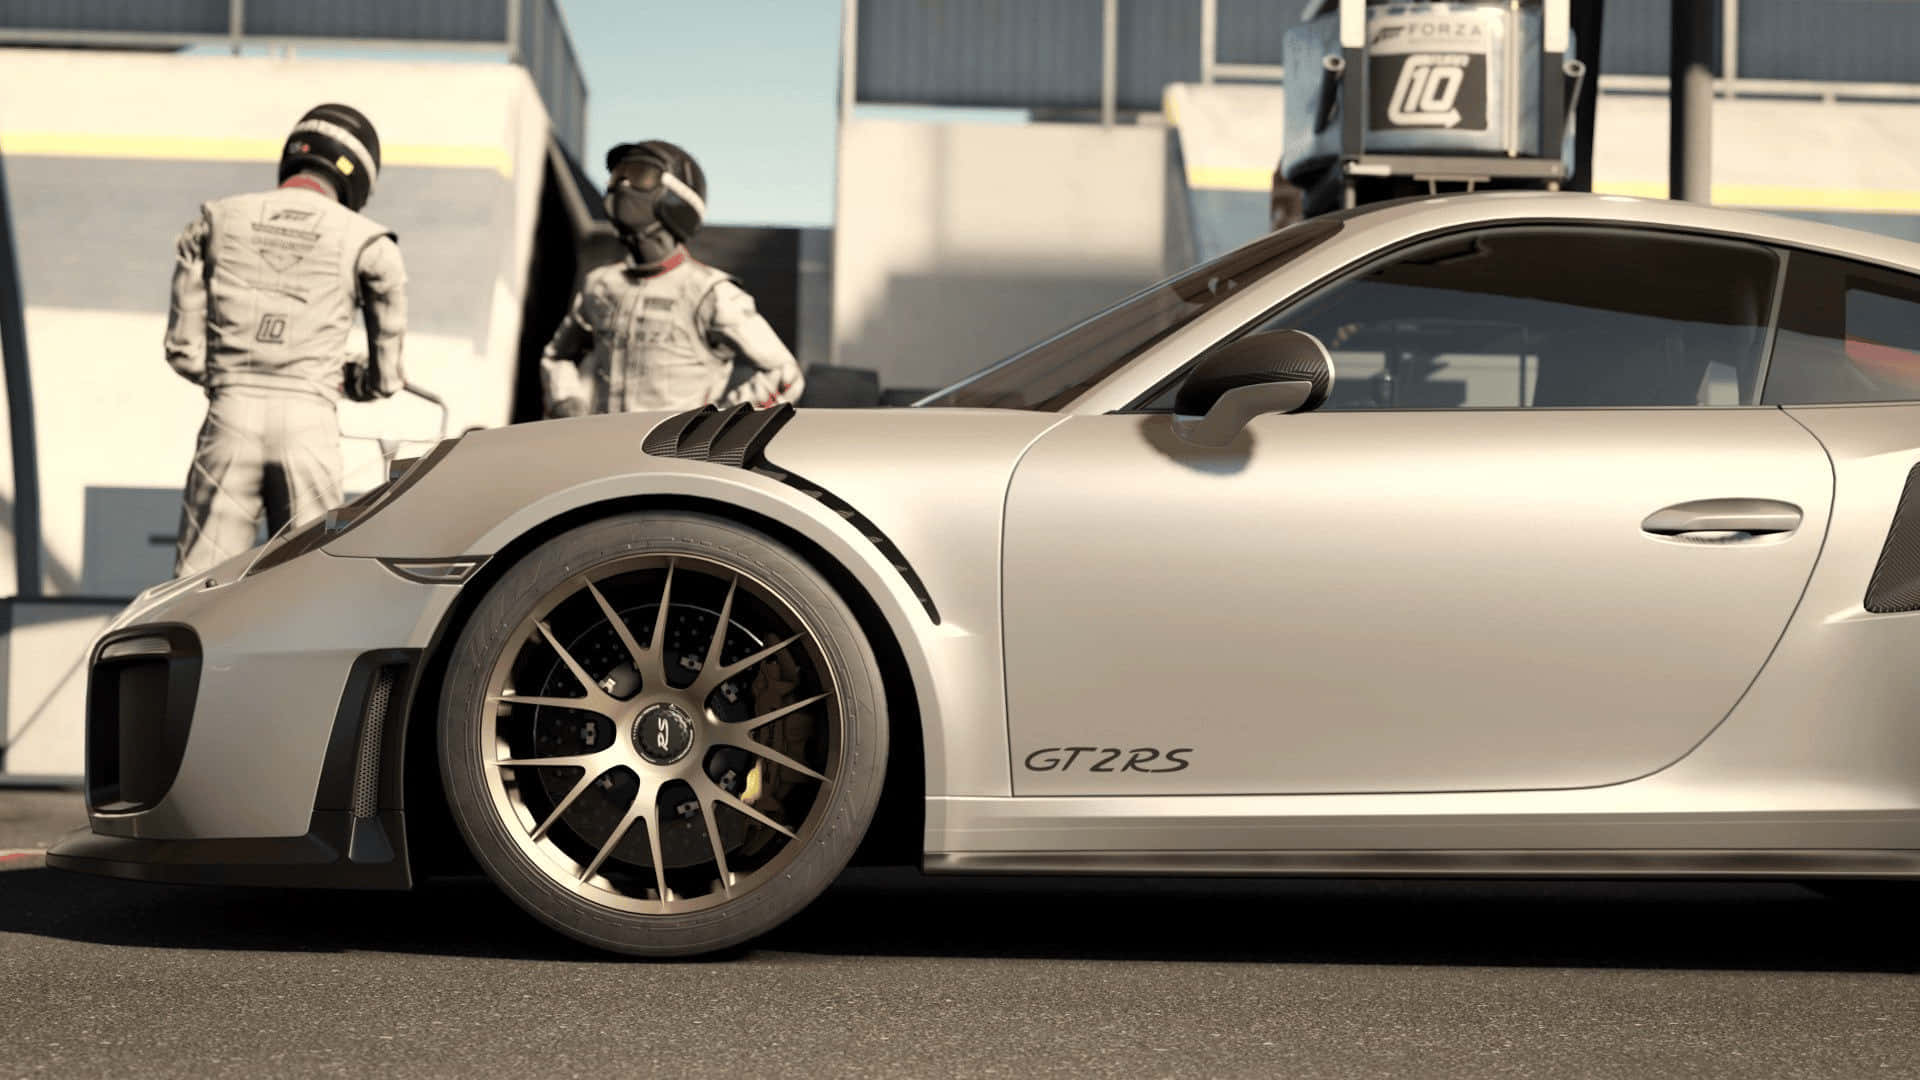 Jump into the fast lane and experience a 1080p racing experience with Forza Motorsport 7